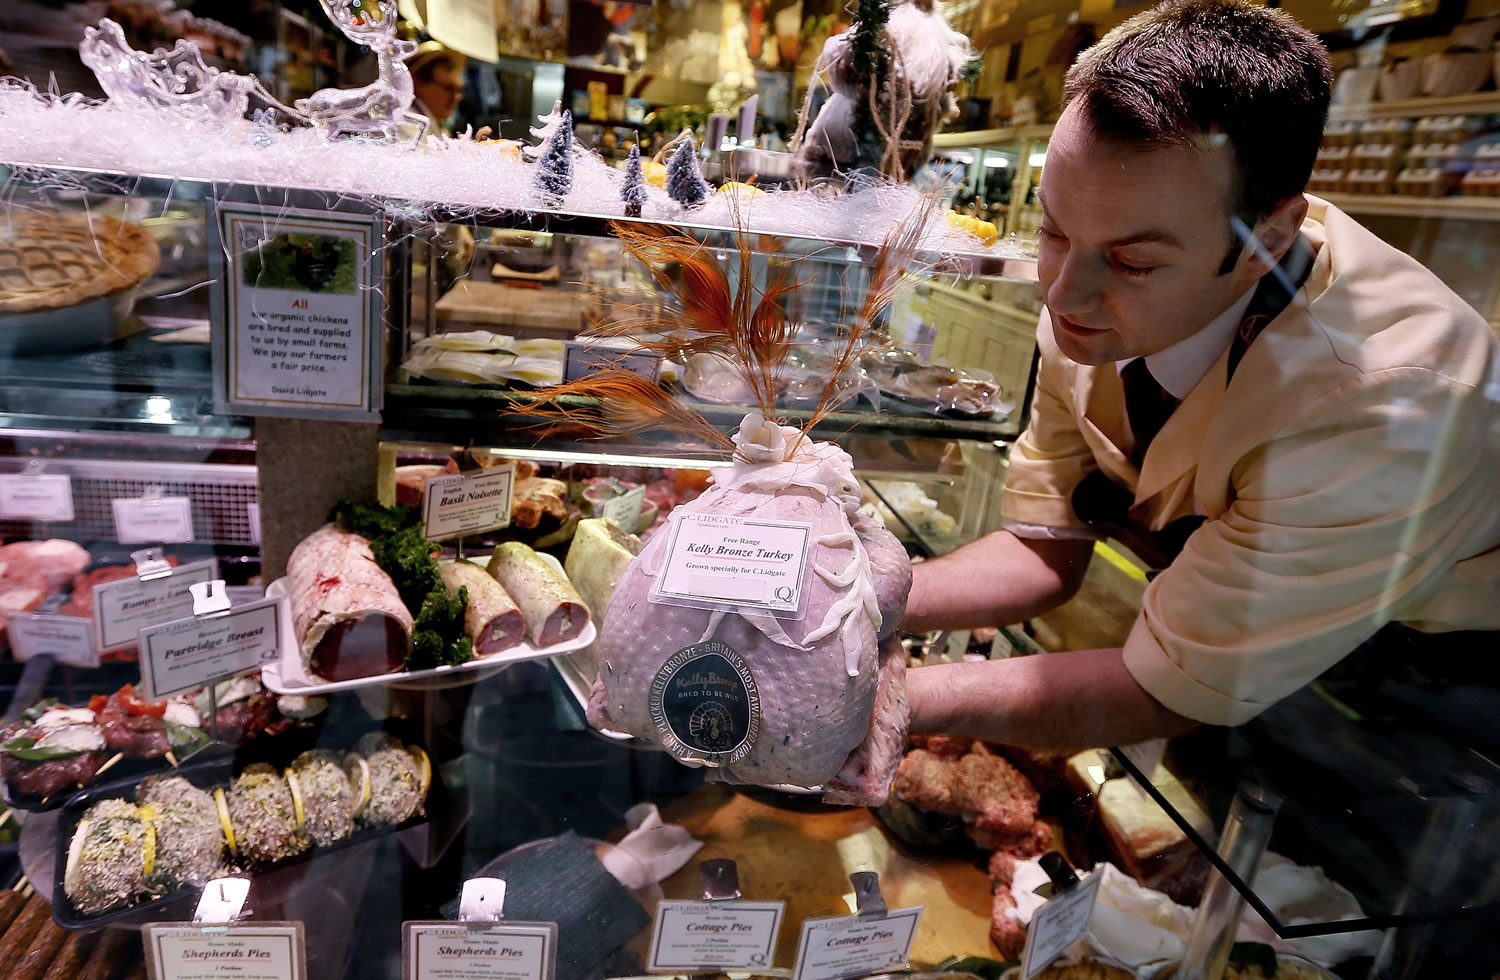 Seen through the window, Danny Lidgate places a turkey on display at his butcher shop Tuesday in Holland Park in London.